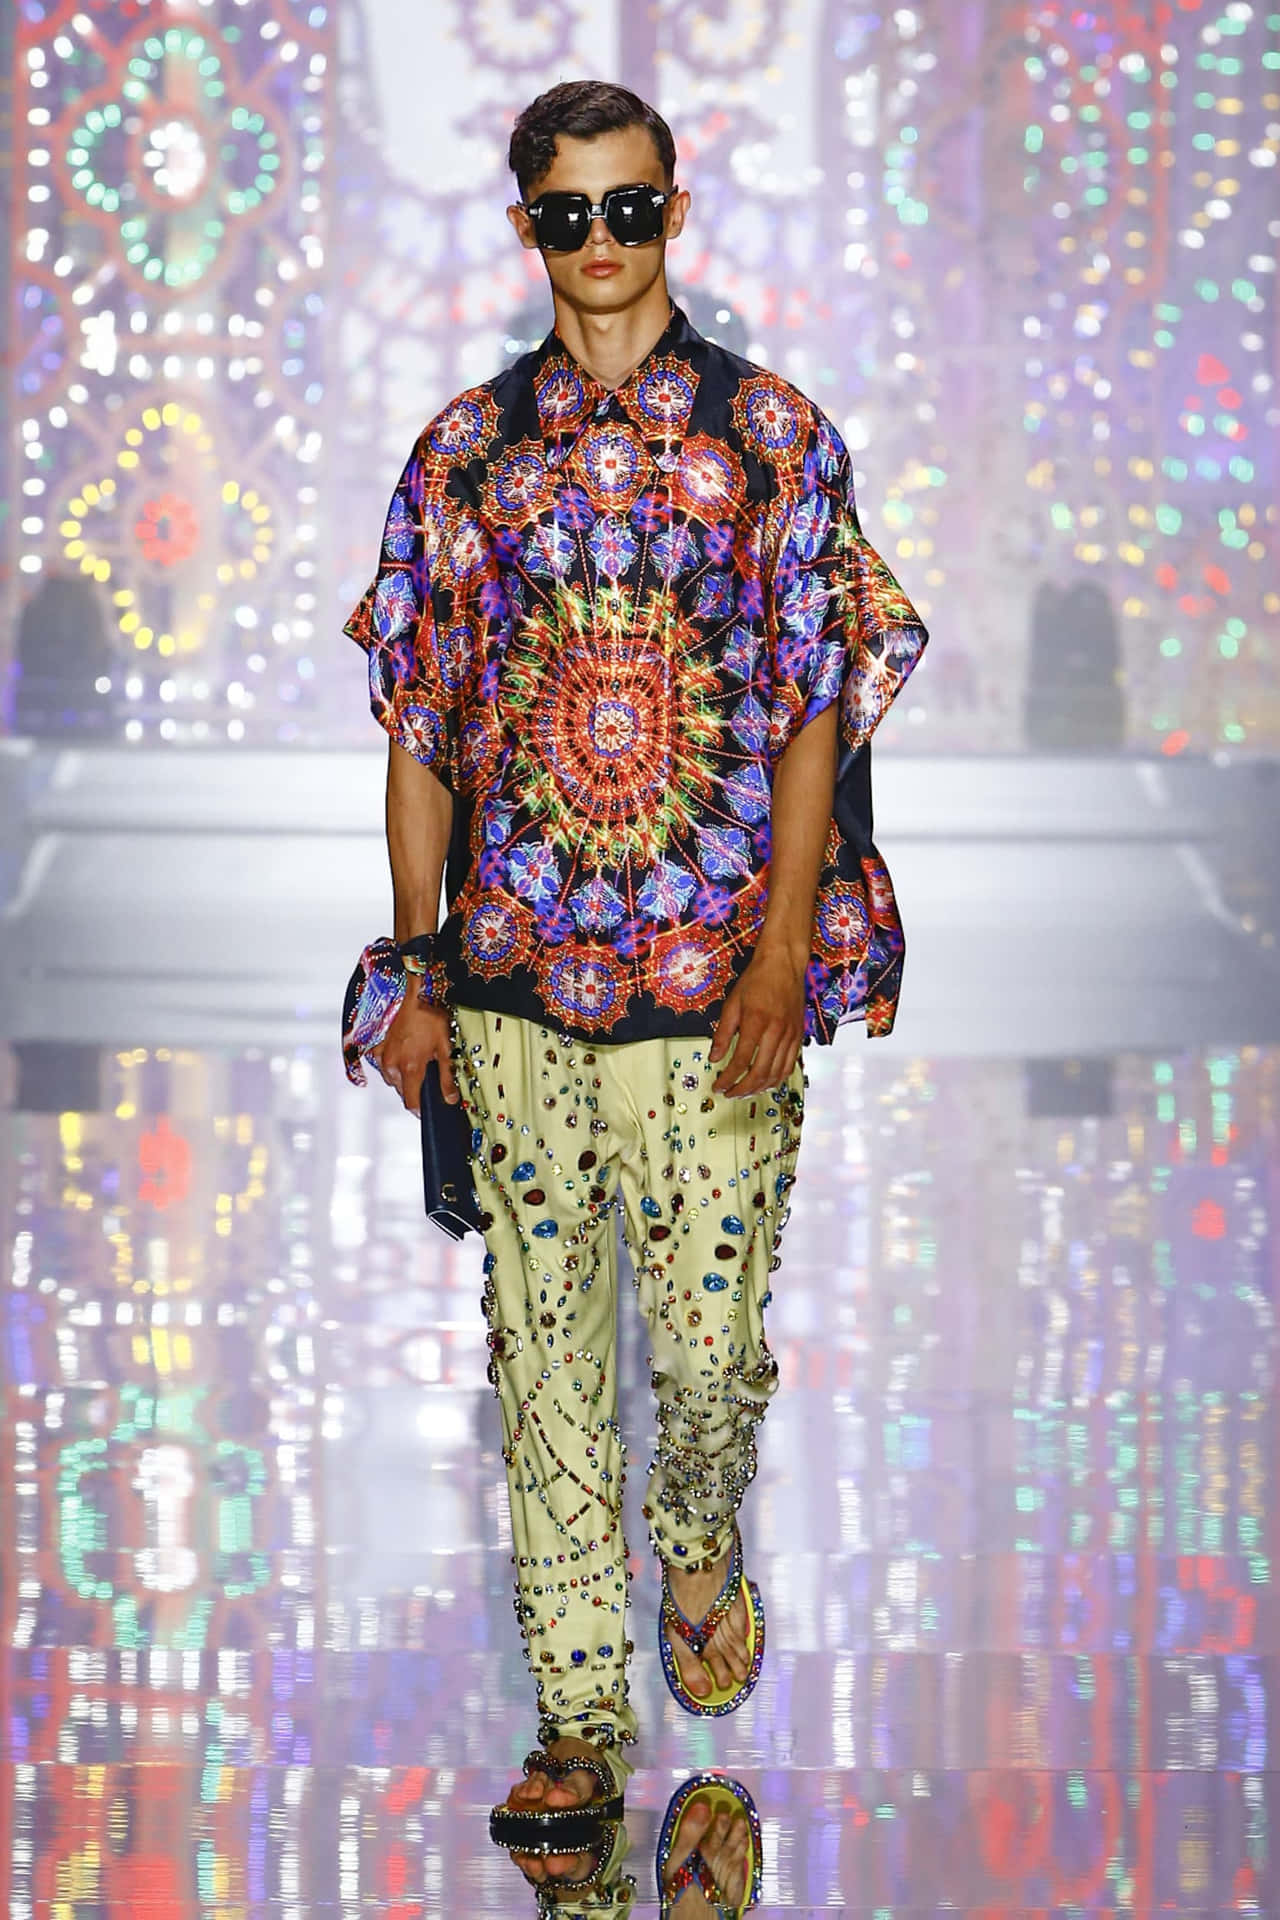 A Man Wearing A Colorful Shirt And Pants On The Runway